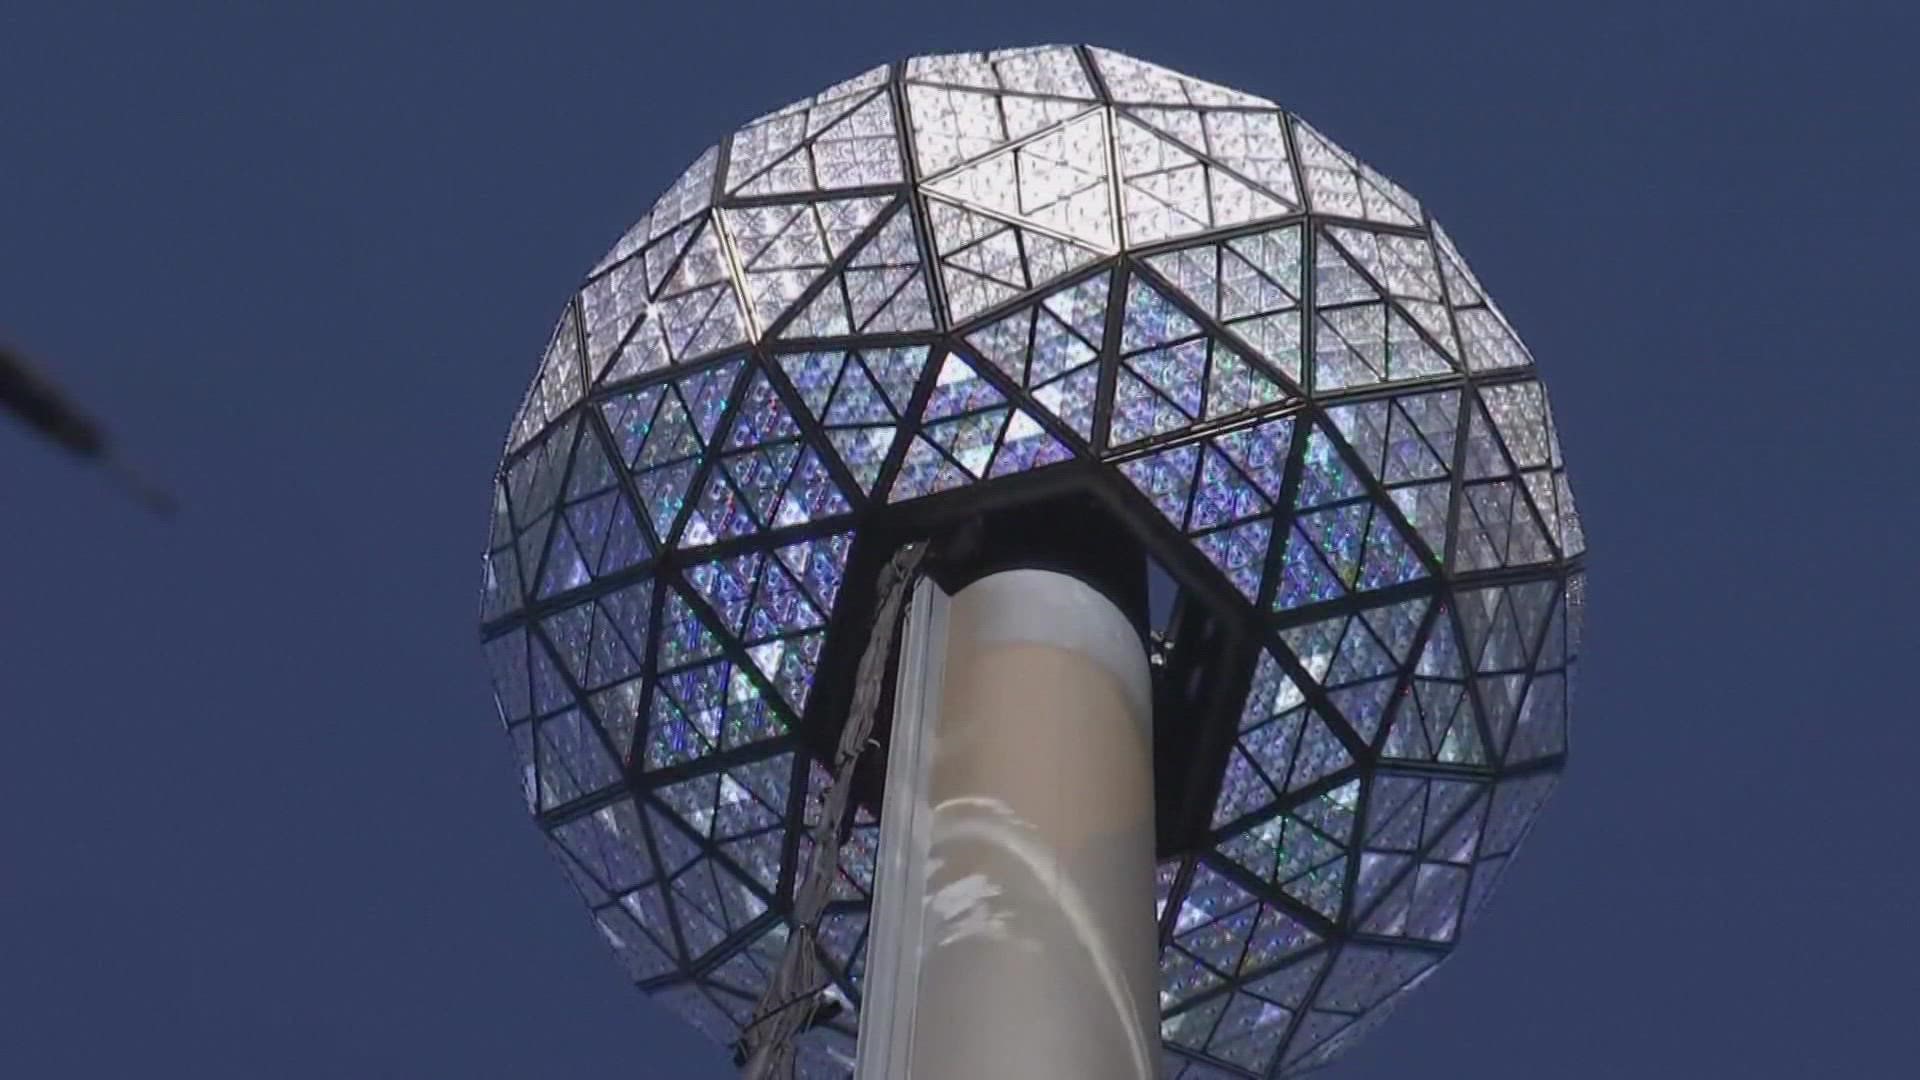 The ball is covered with more than 2K Waterford crystal triangles and illuminated by more than 32K LED lights.